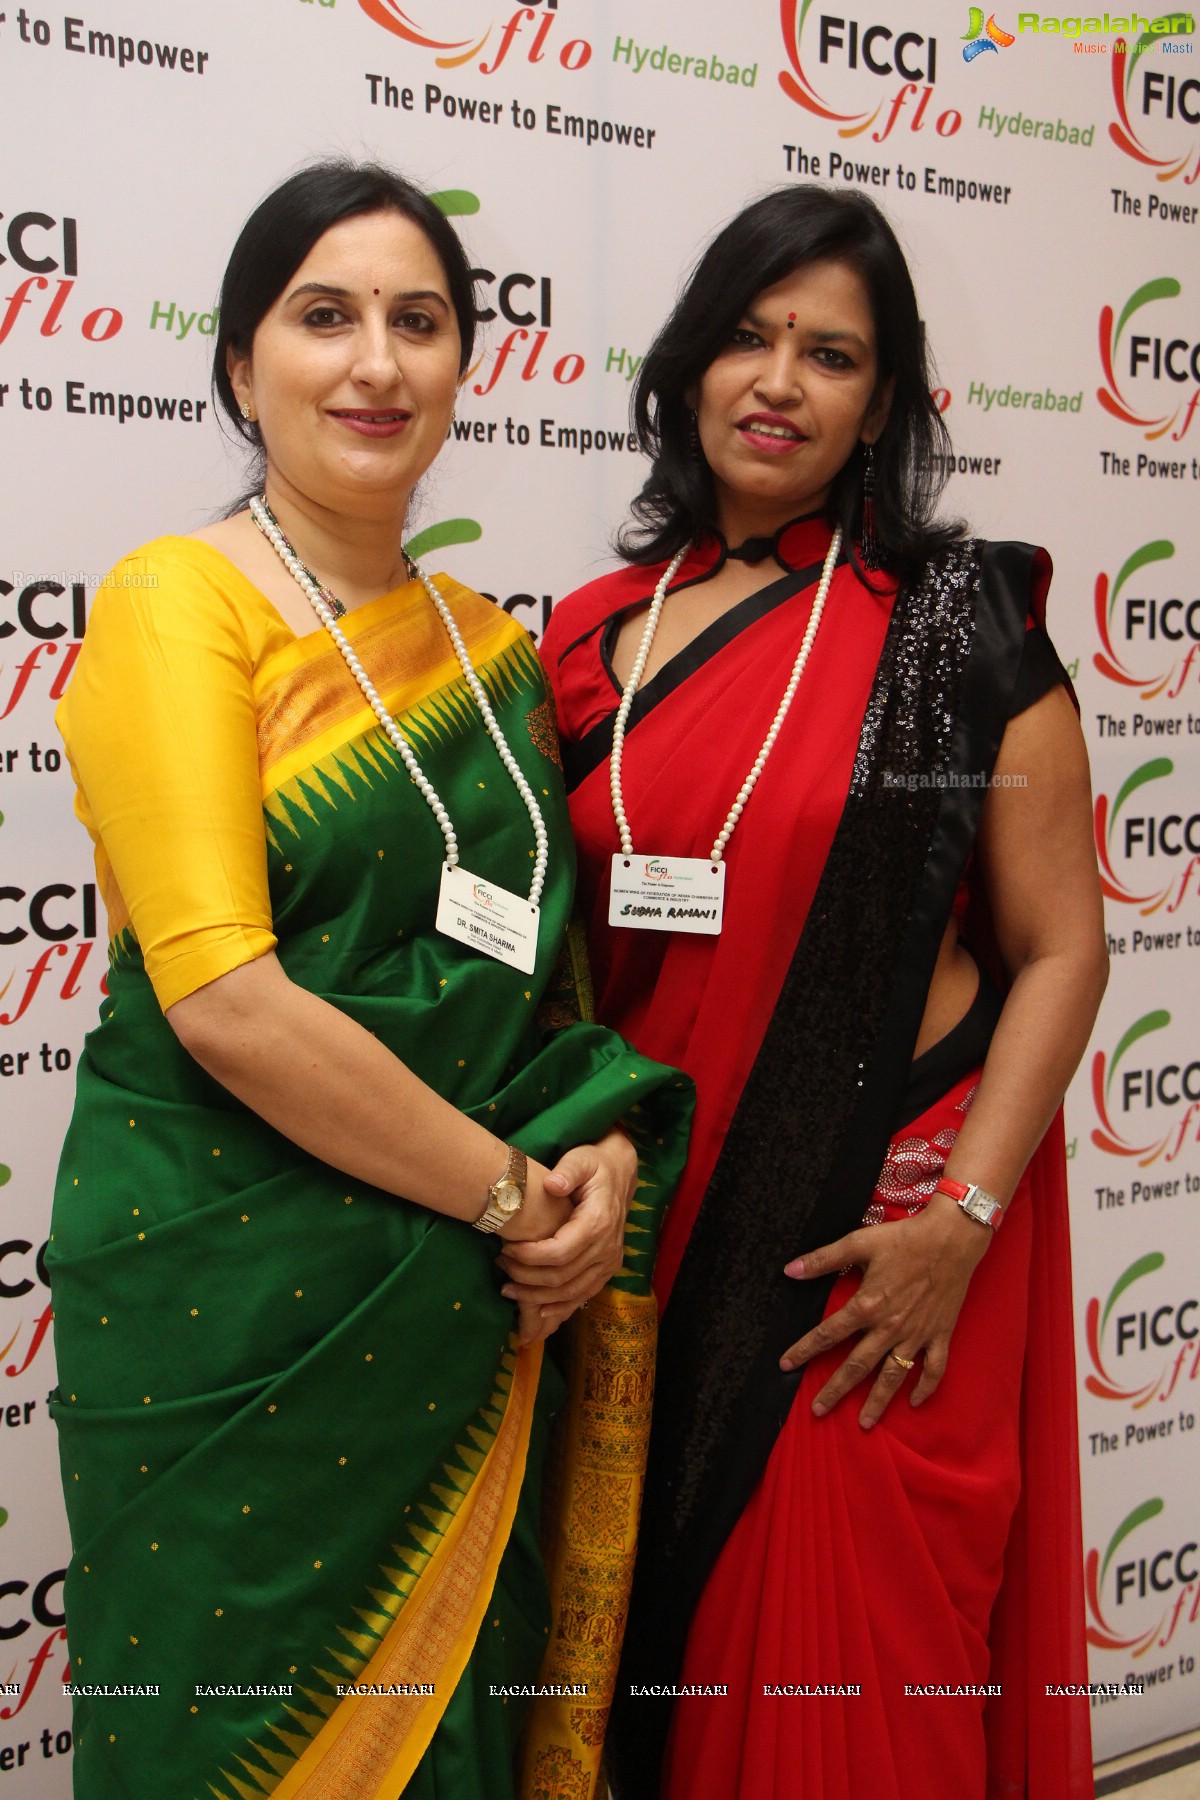 30 Women in Power - Their Voices Their Stories Book Launch at FICCI Ladies Organization Meet Panel Discussion